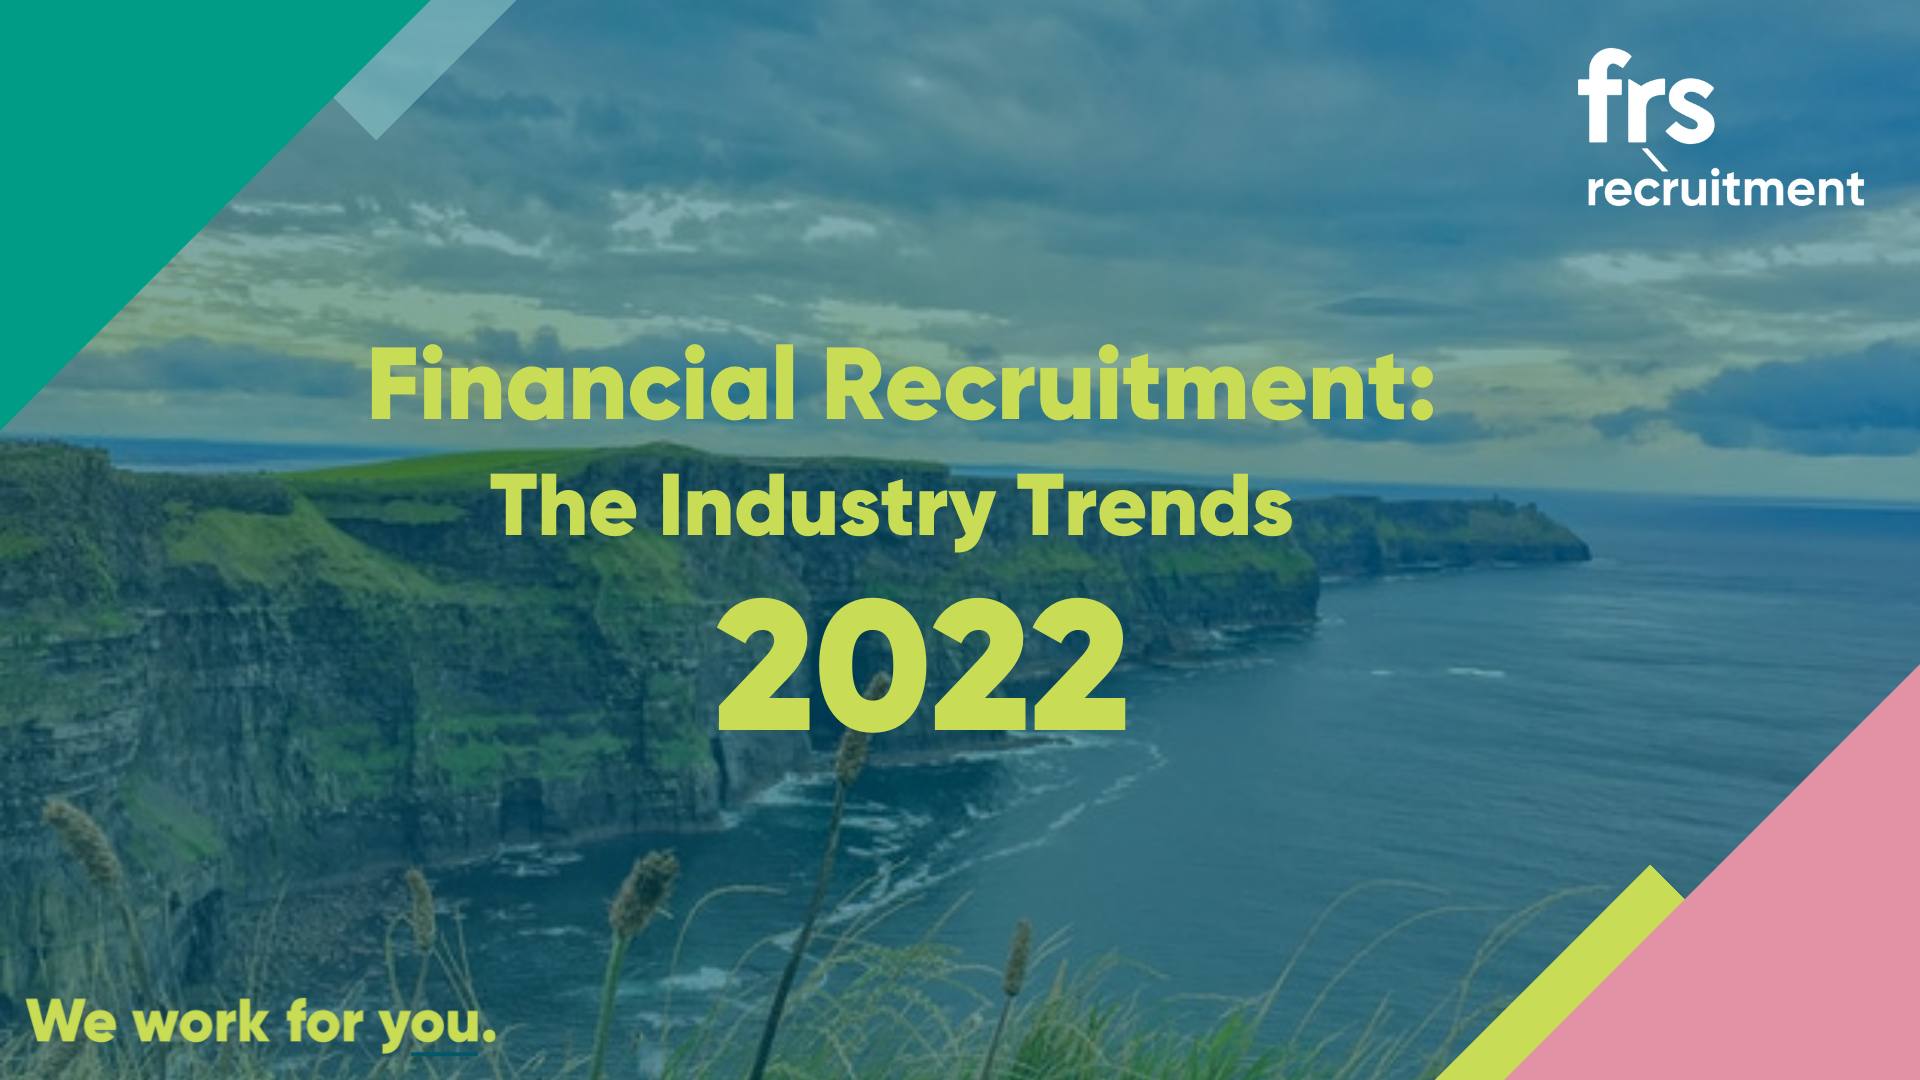 Financial Recruitment: The Industry Trends of 2022